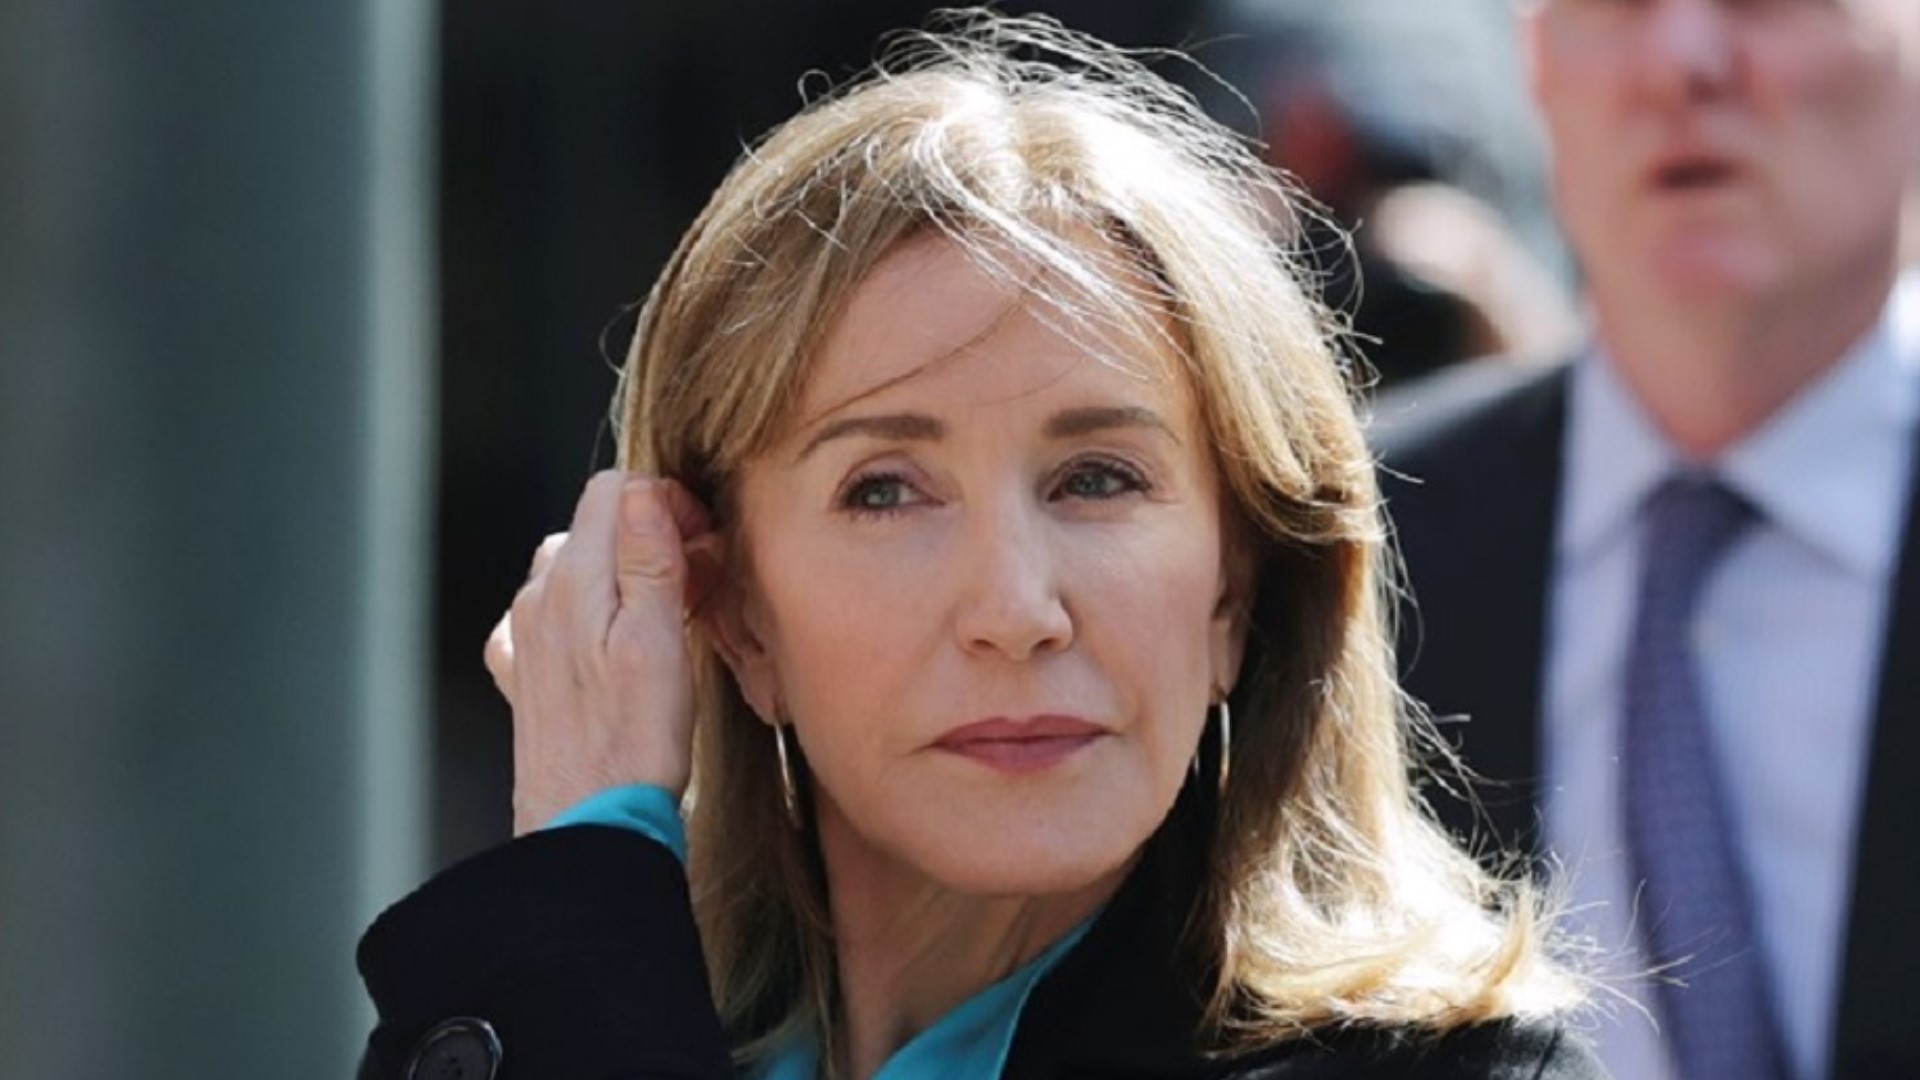 Actress Felicity Huffman has been sentenced to 14 days in prison for her role in the sweeping college admissions scandal. The "Desperate Housewives" star was sentenced in Boston's federal court Friday after pleading guilty in May to a single count of conspiracy and fraud. She was also given a $30,000 fine, 250 hours of community service and a year of supervised release.